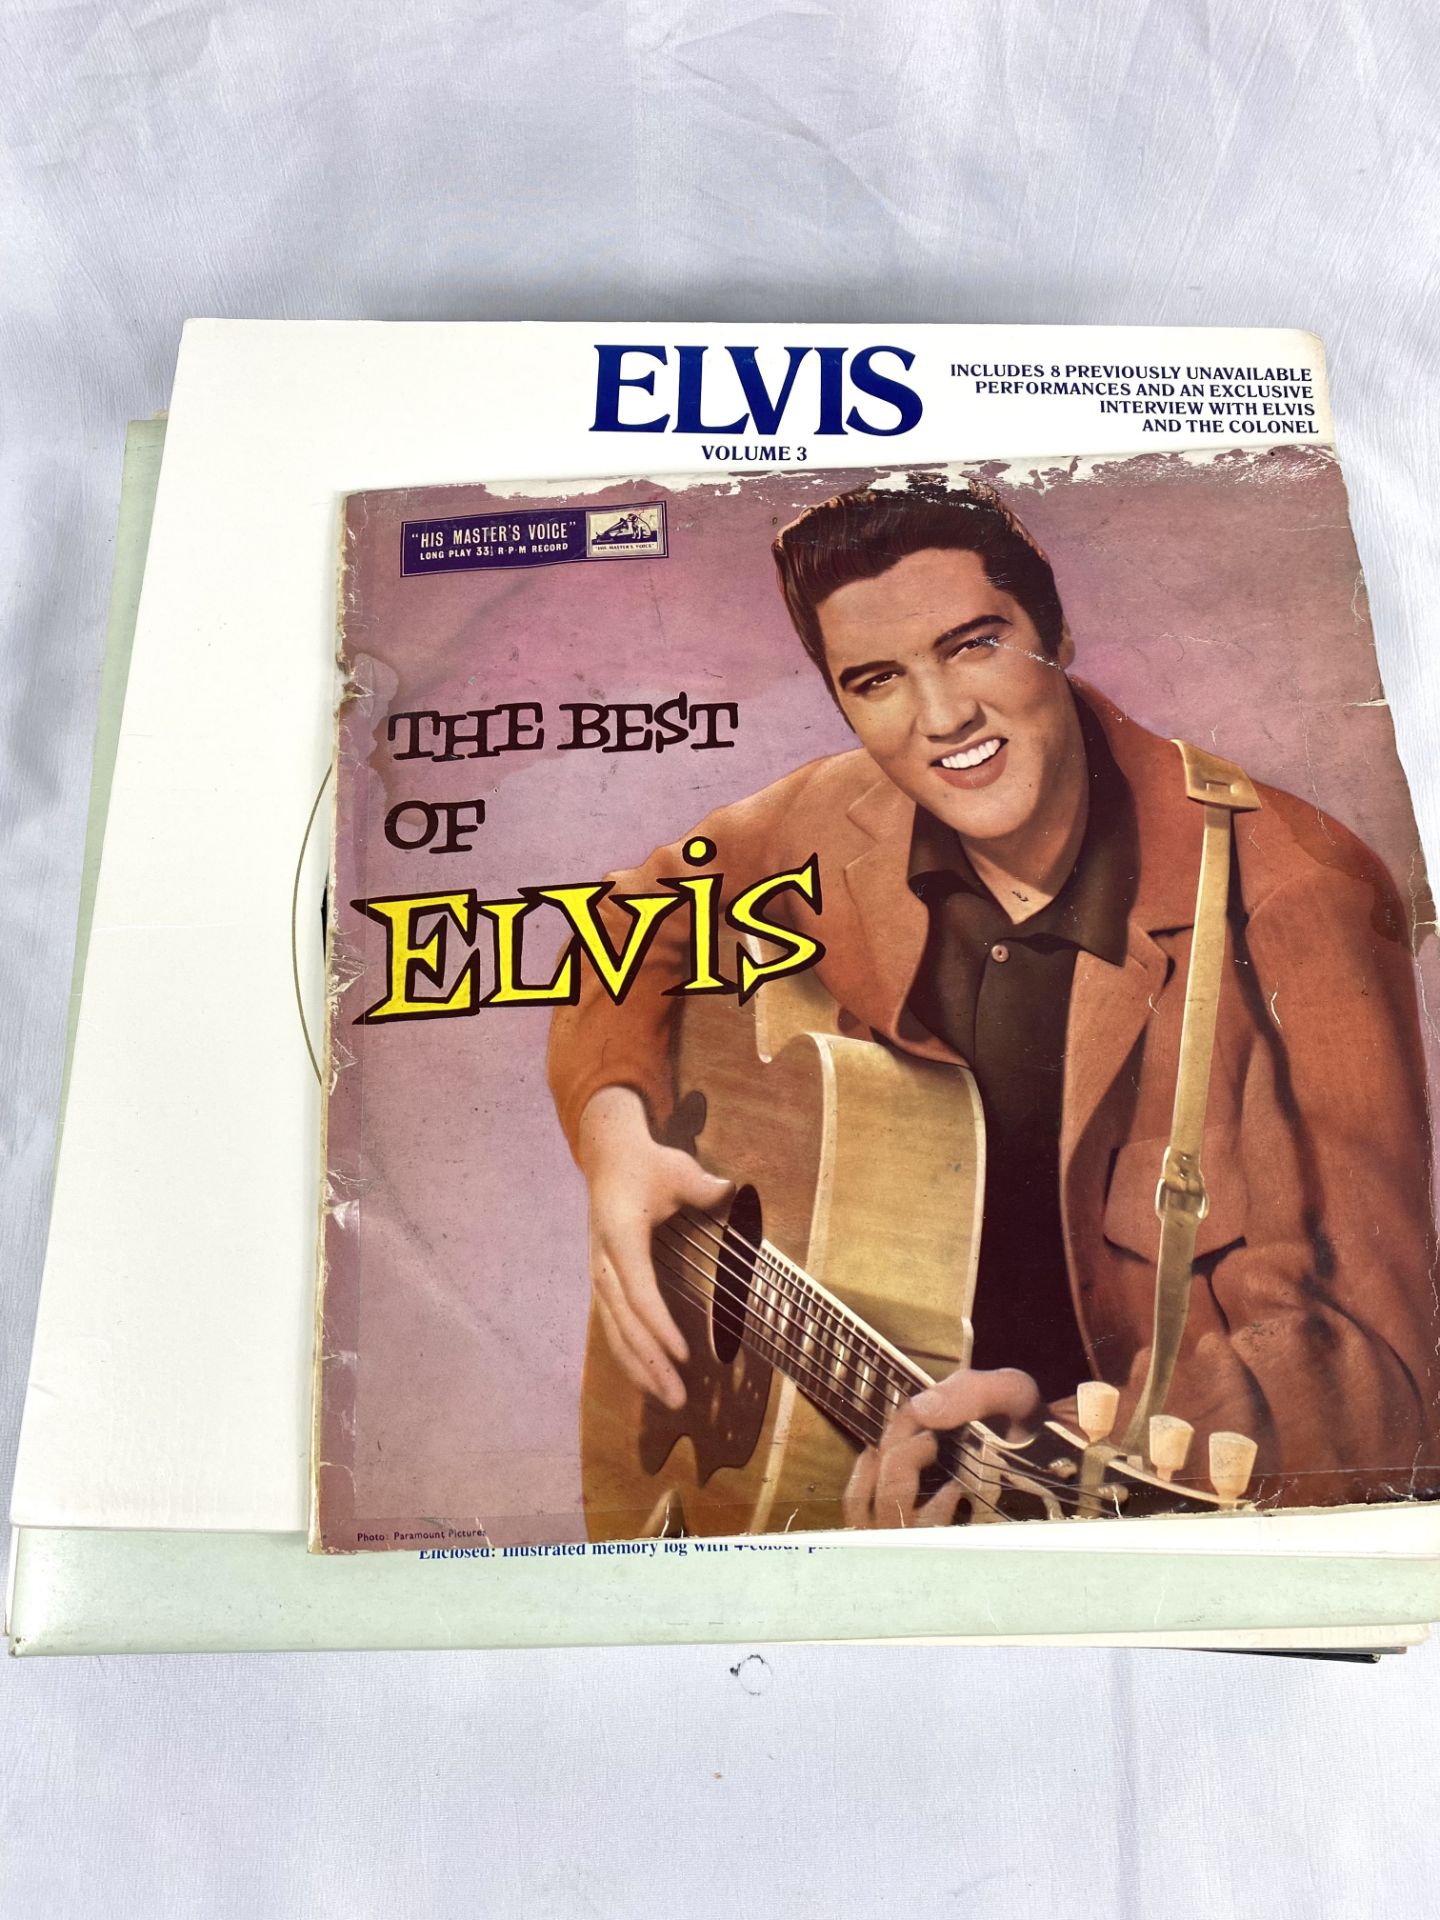 Collection of Elvis Presley records